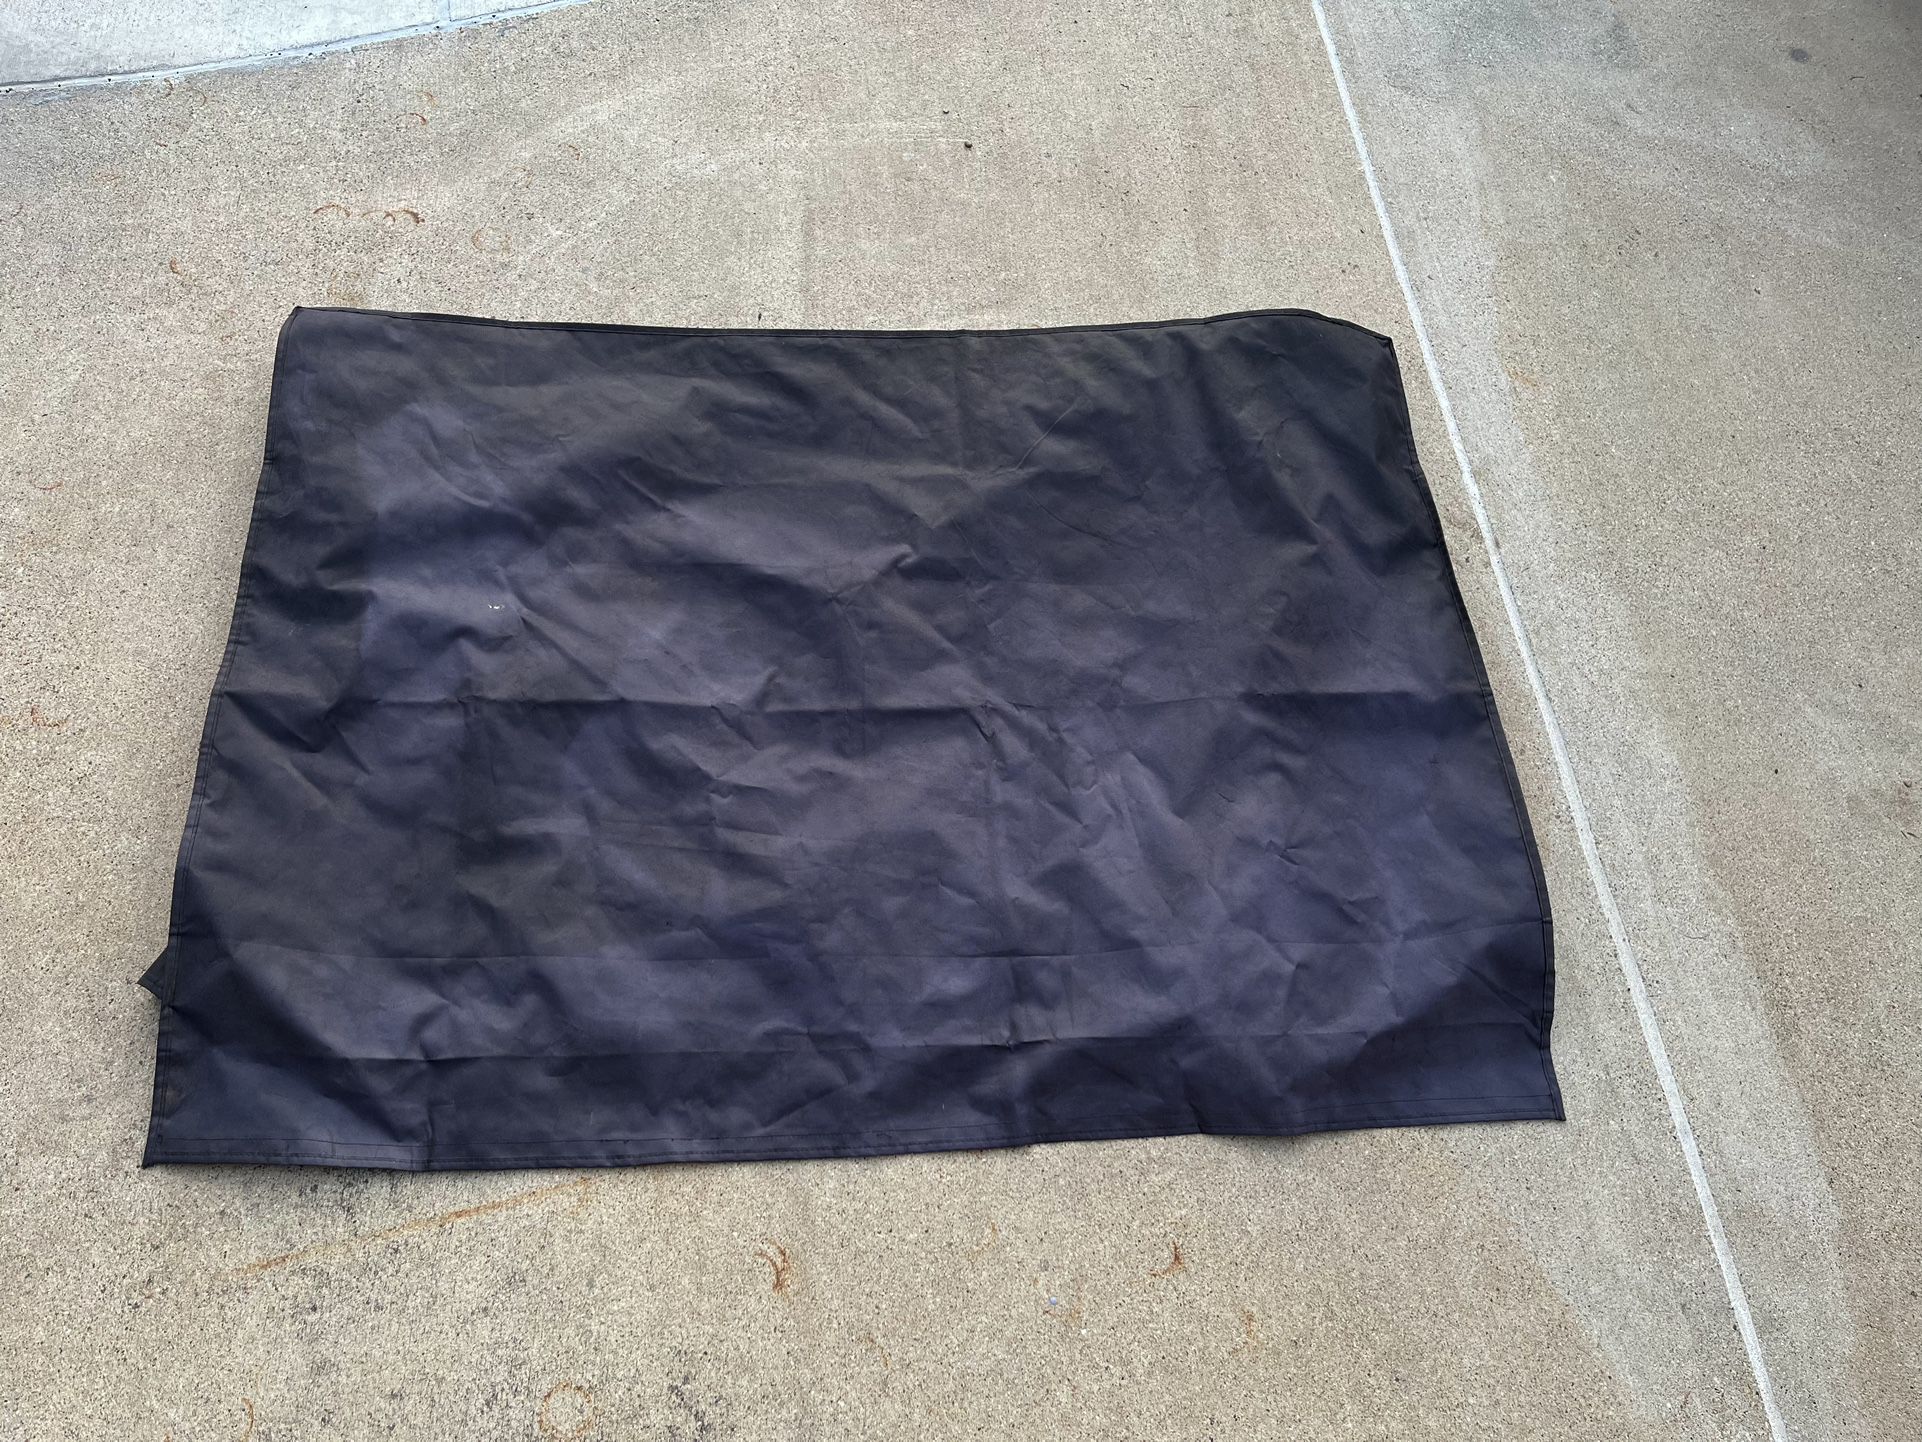 Tv Outdoor Cover 